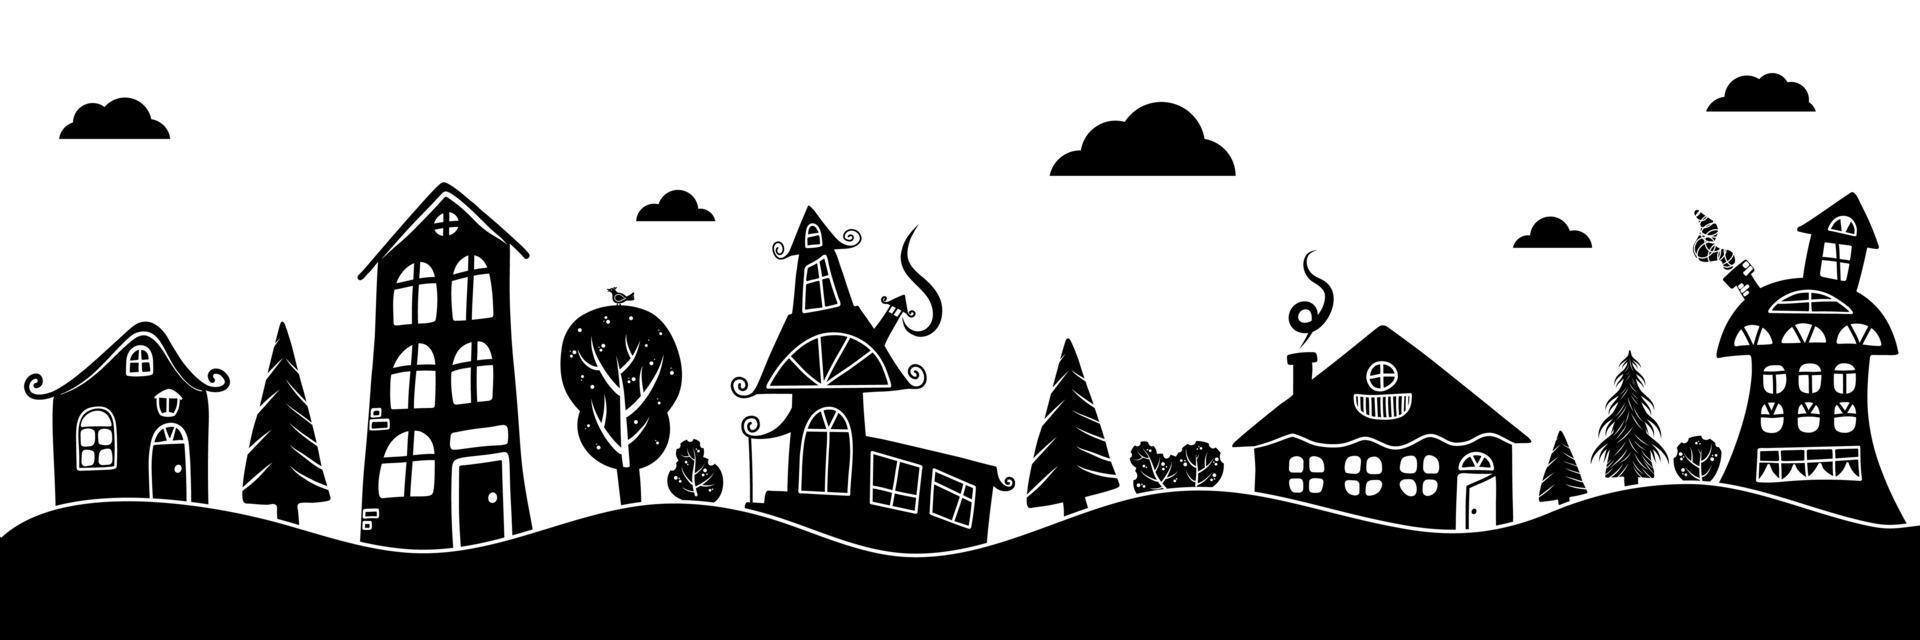 Small cartoon town silhouette cutout clouds with houses trees black and white. Vector Illustration with fairy town silhouette.